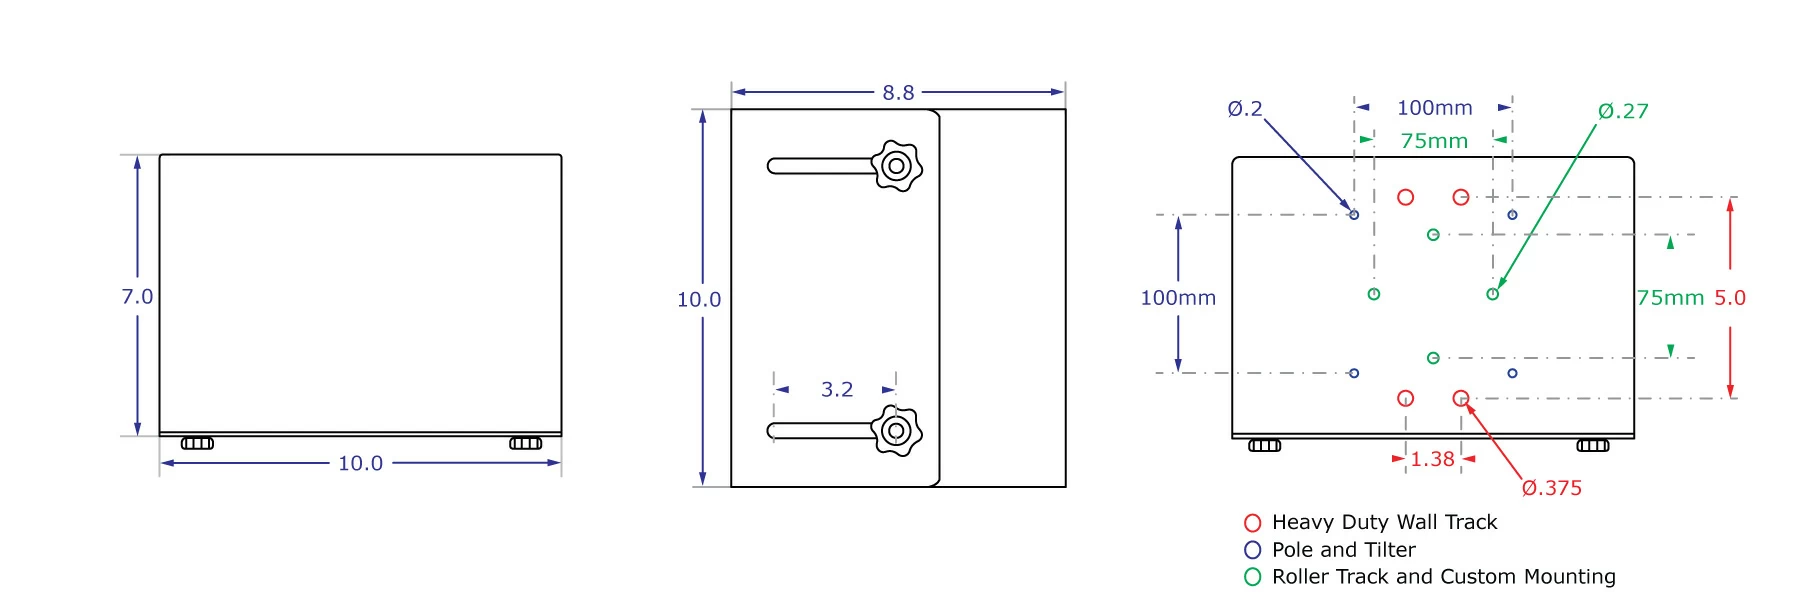 Extra large CPU holder specification drawing with measurements for both sides and bottom